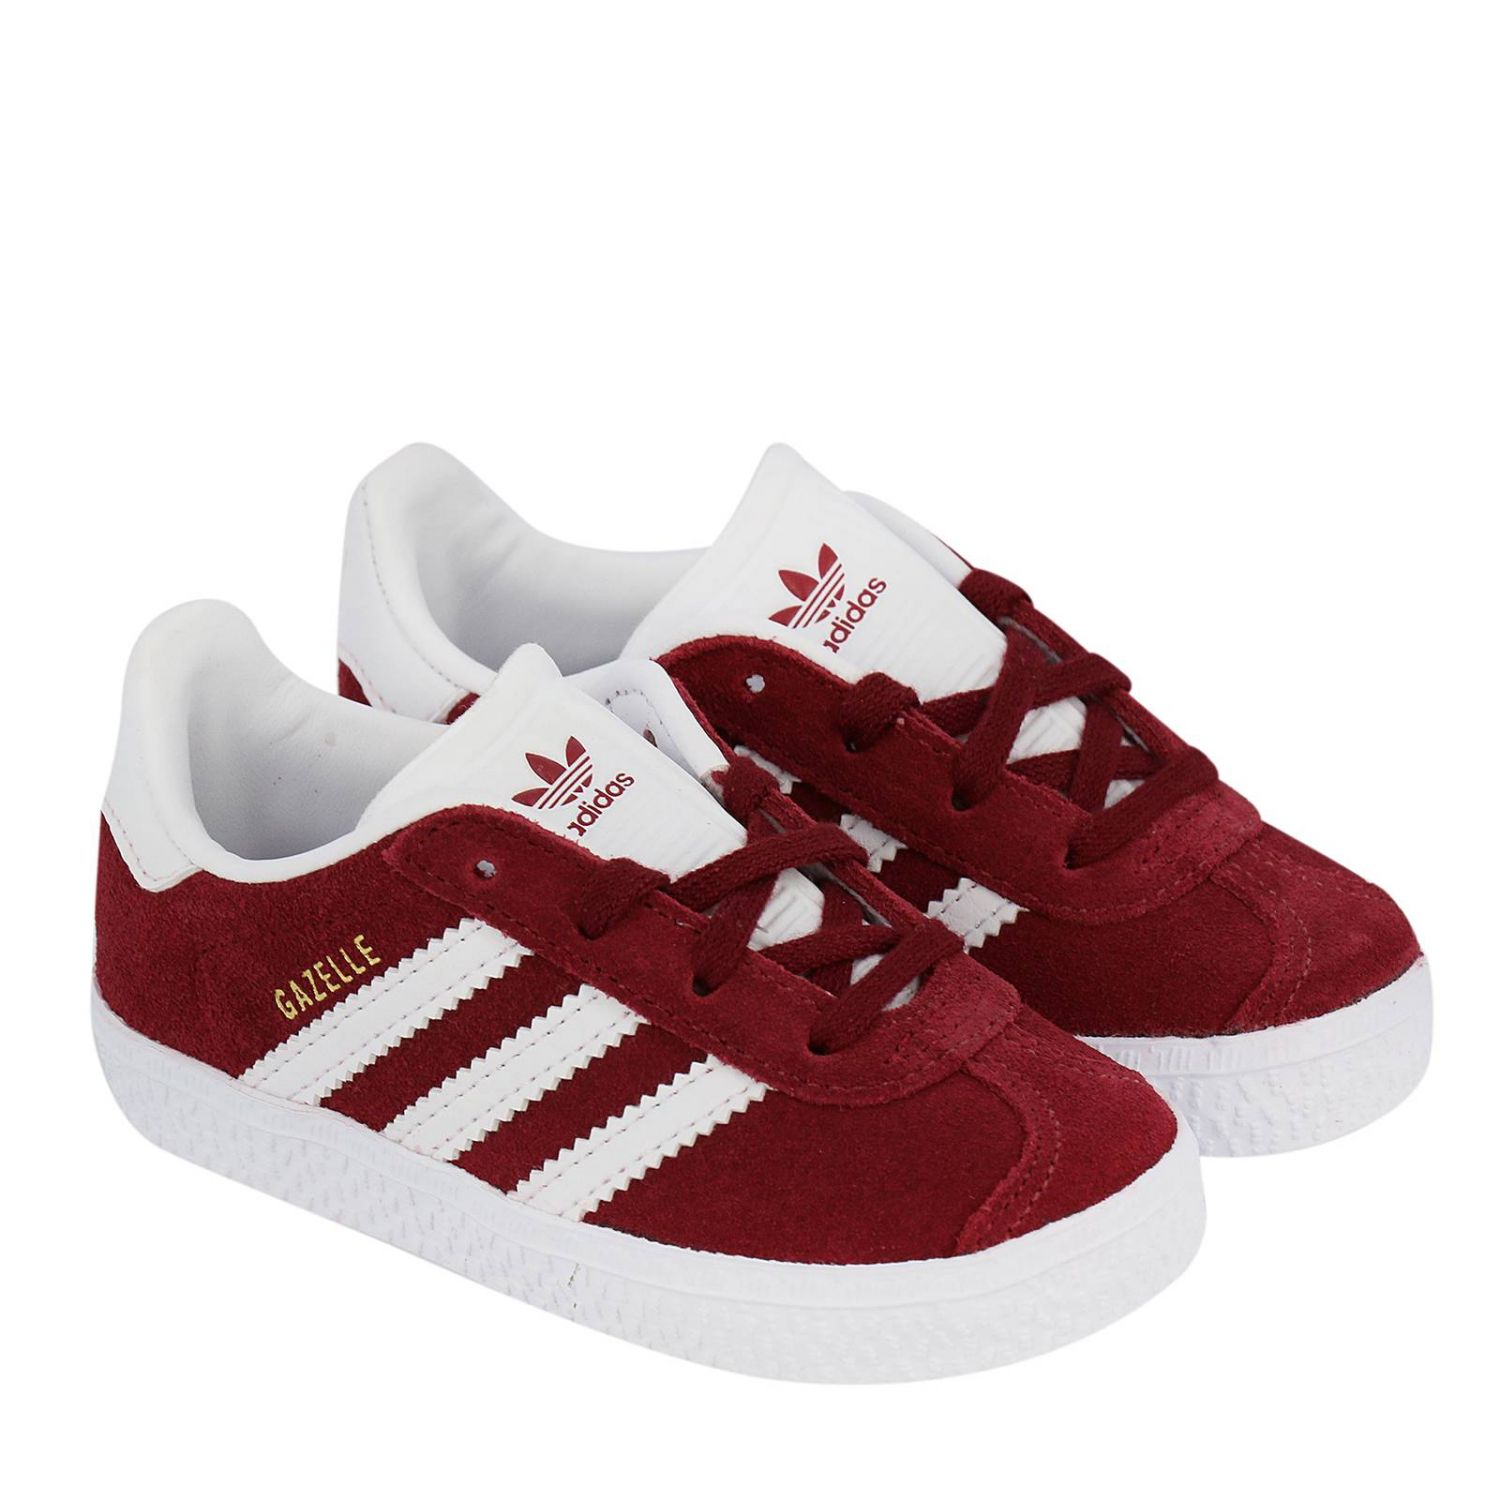 Adidas Originals Gazelle I Classic kids' sneakers in smooth suede leather اسره